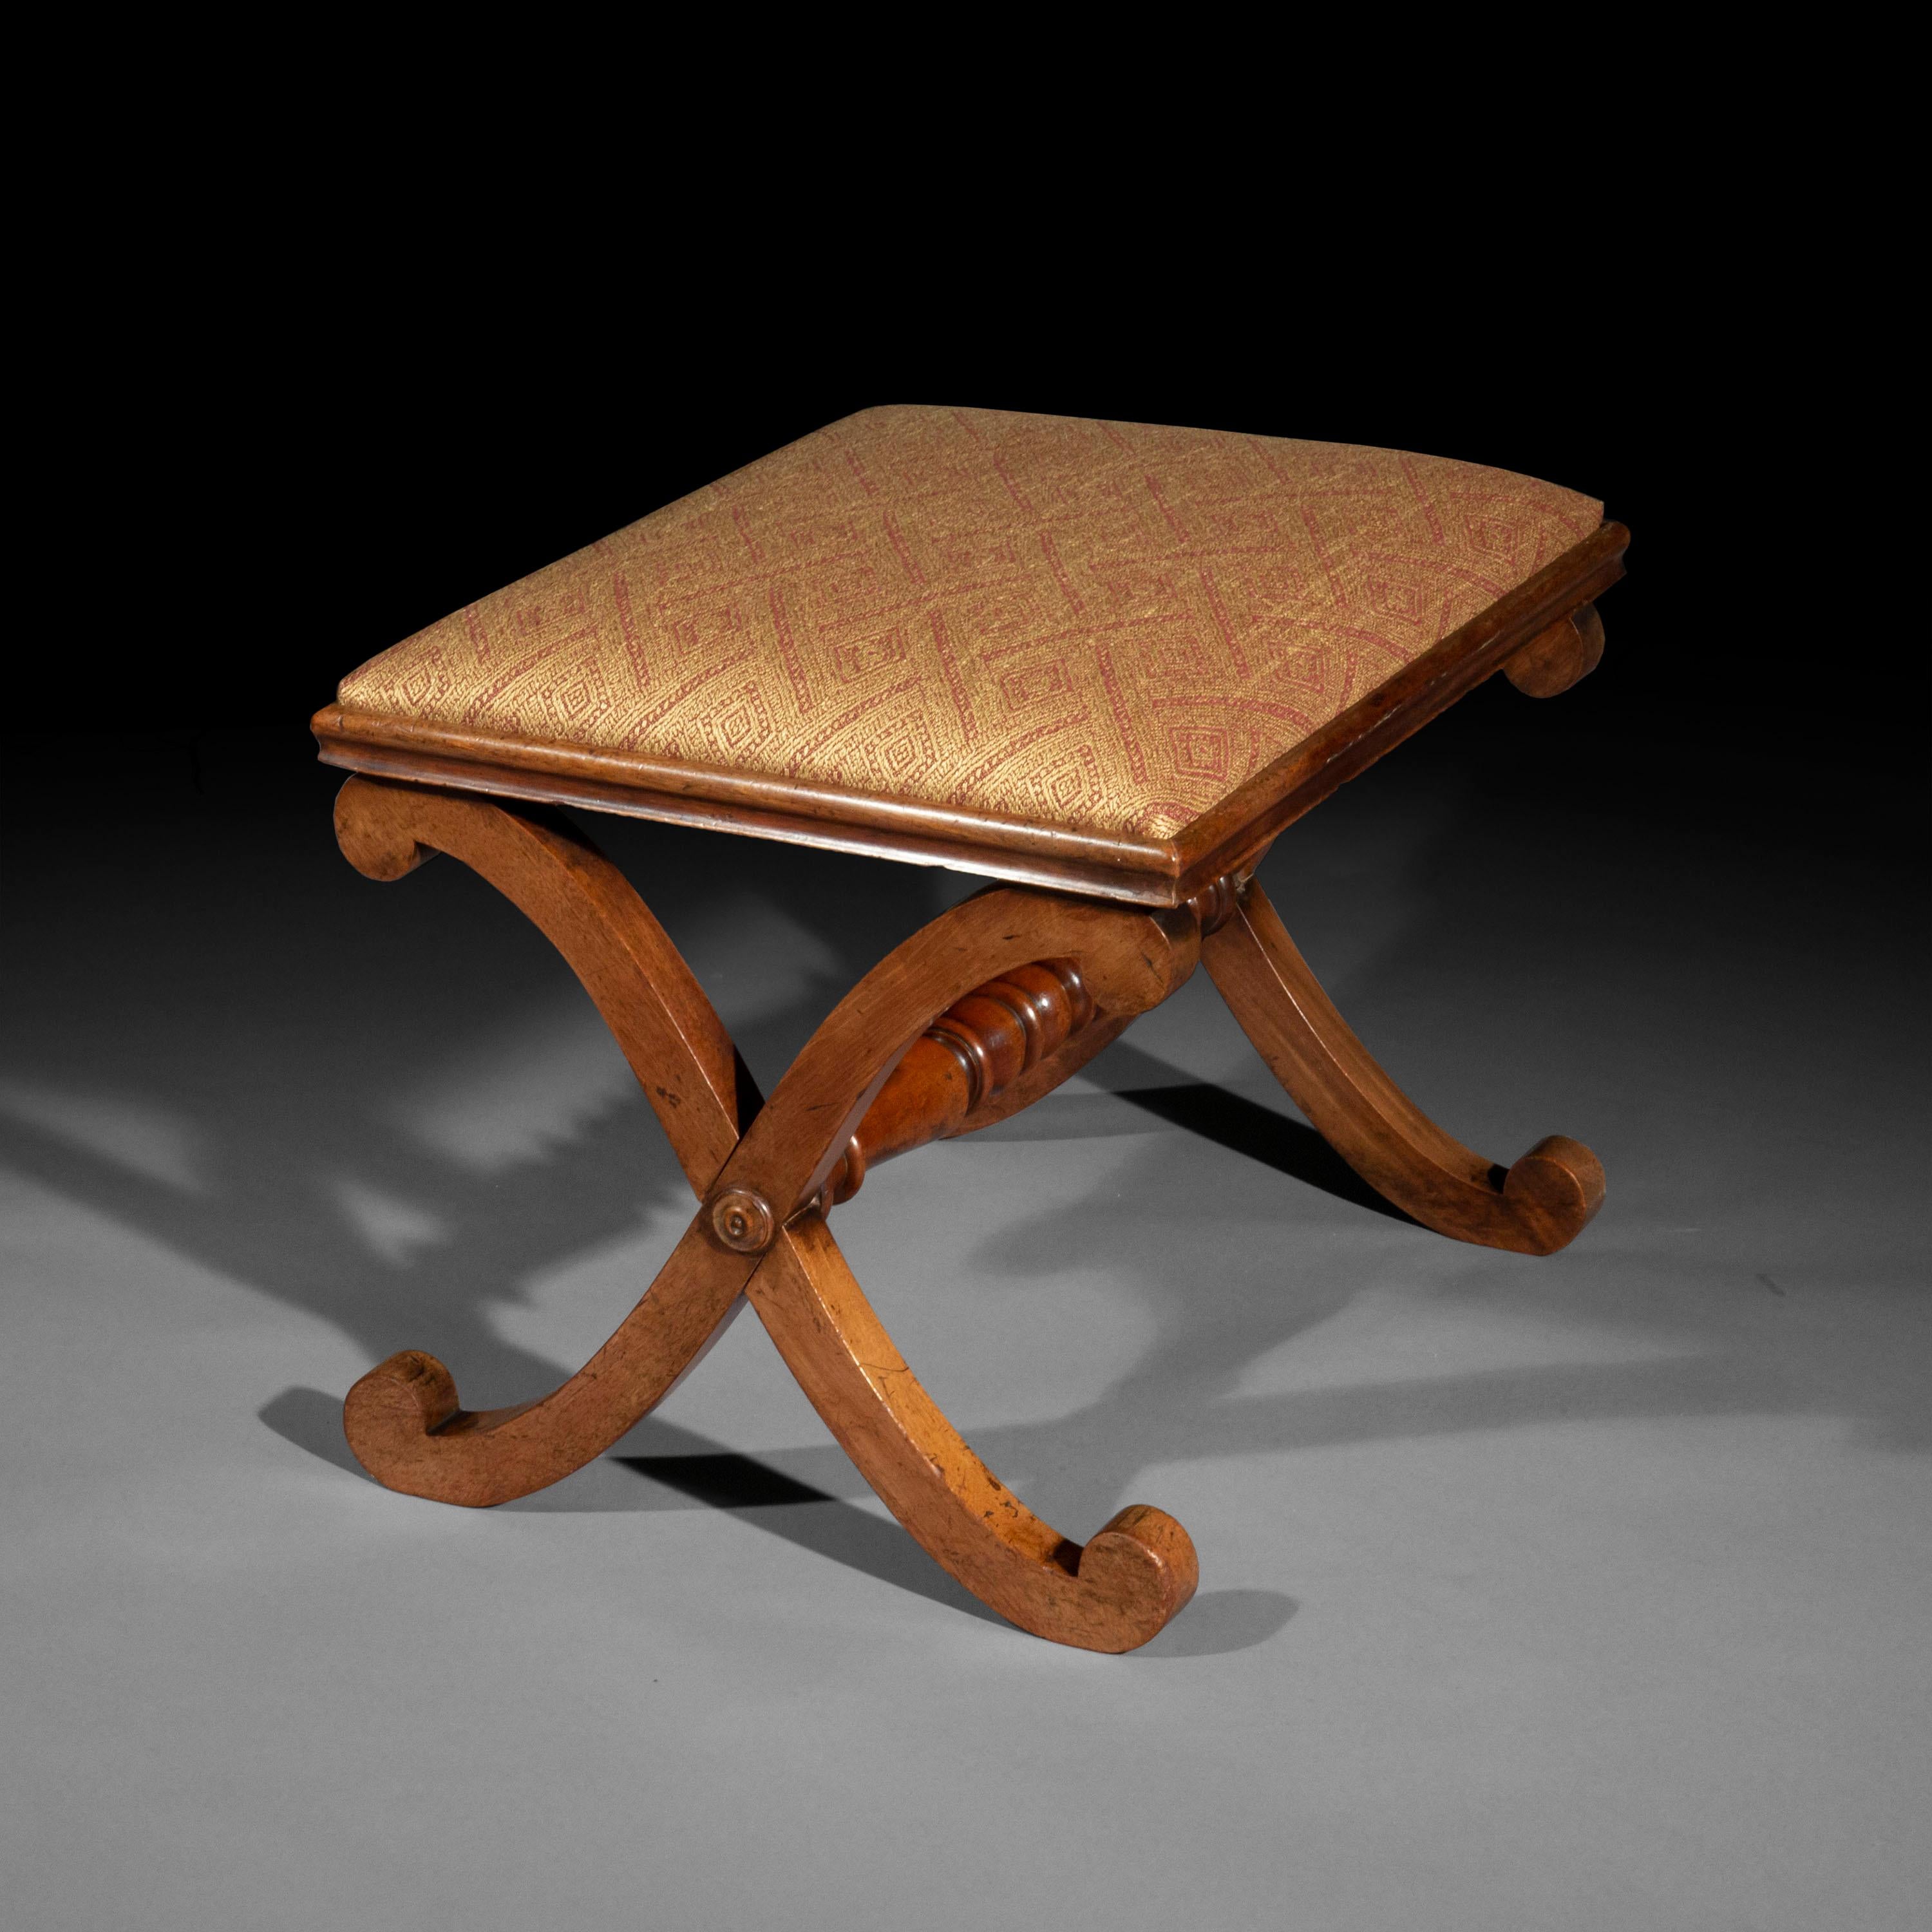 A Regency period X-frame stool after a design by Thomas Hope.
English, circa 1820–30.

Why we like it
Its unusually clean form, evoking classical antiquity, is both timeless and highly decorative. An elegant accent piece for a Classic or eclectic